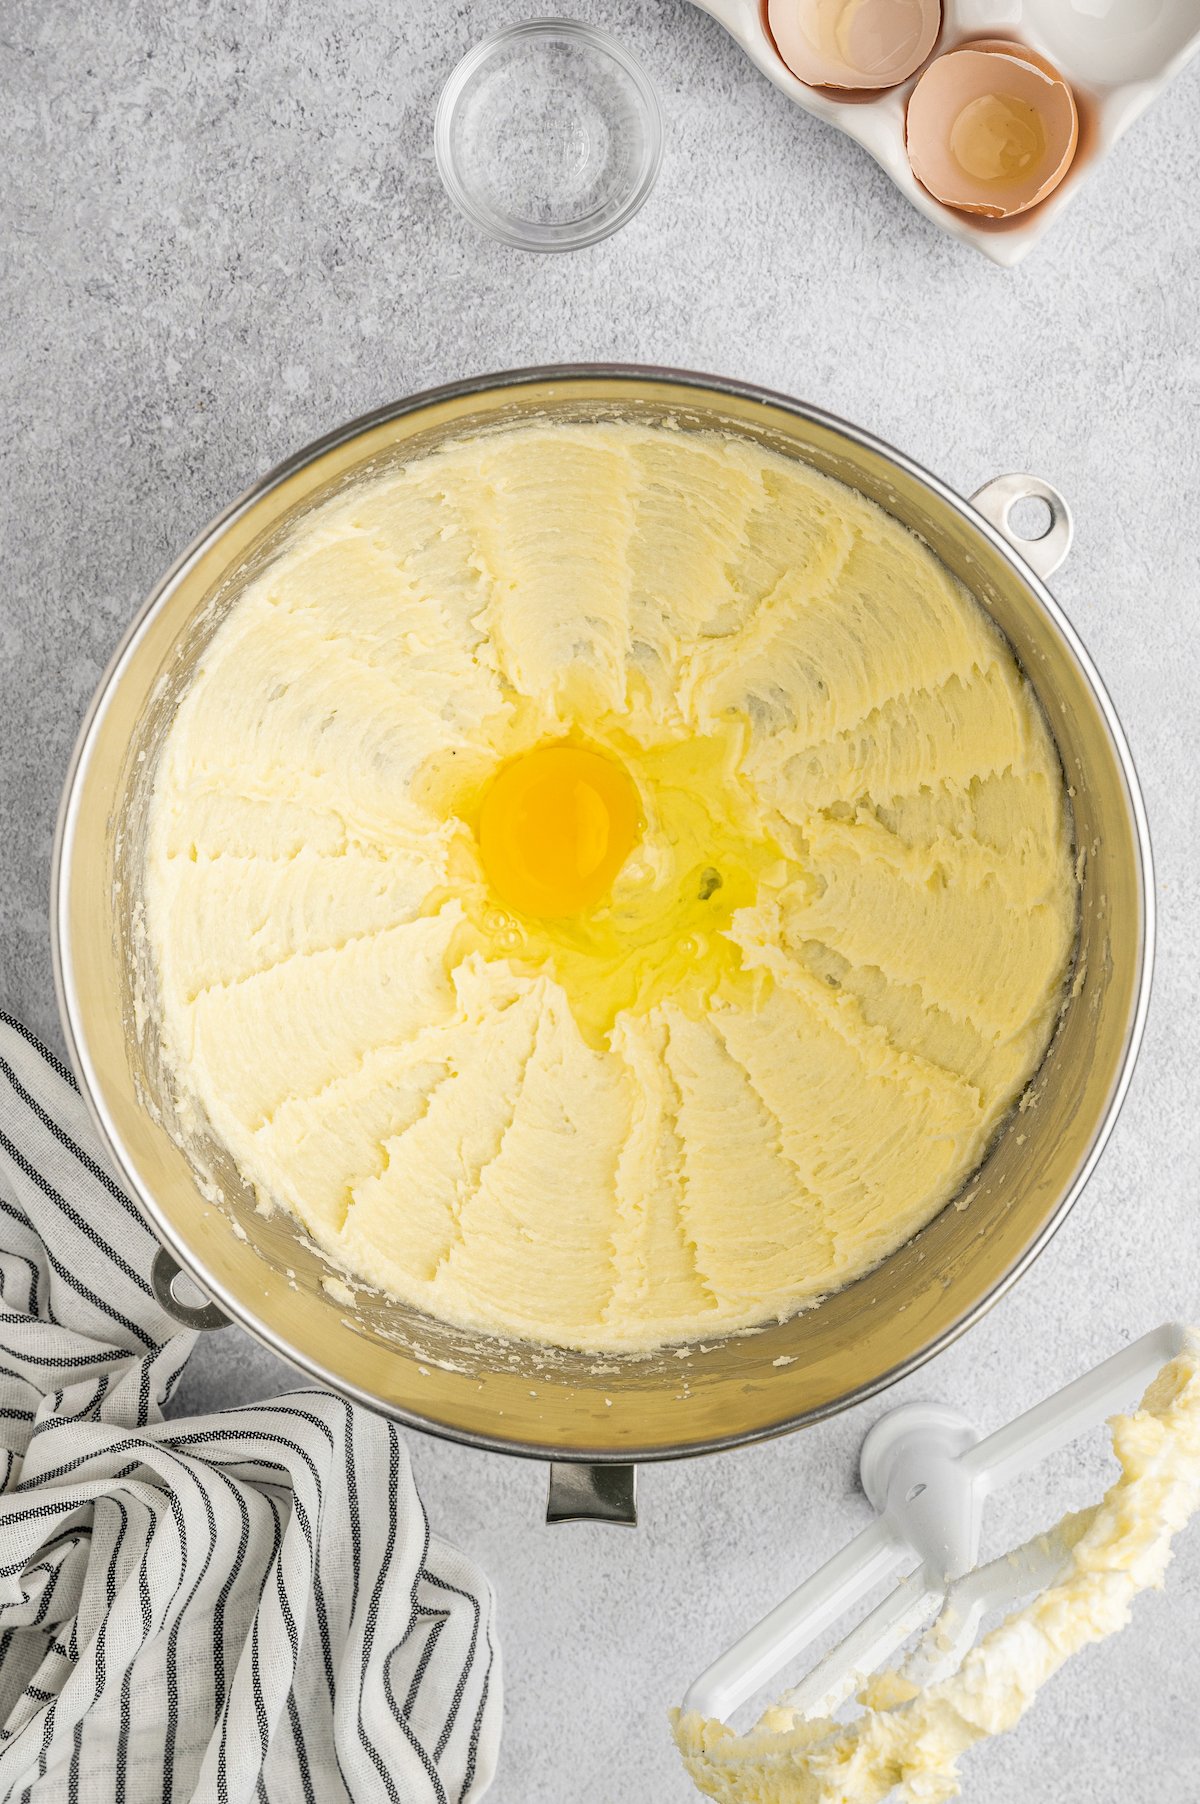 Creamed butter and sugar in a mixing bowl with an egg cracked in the center.